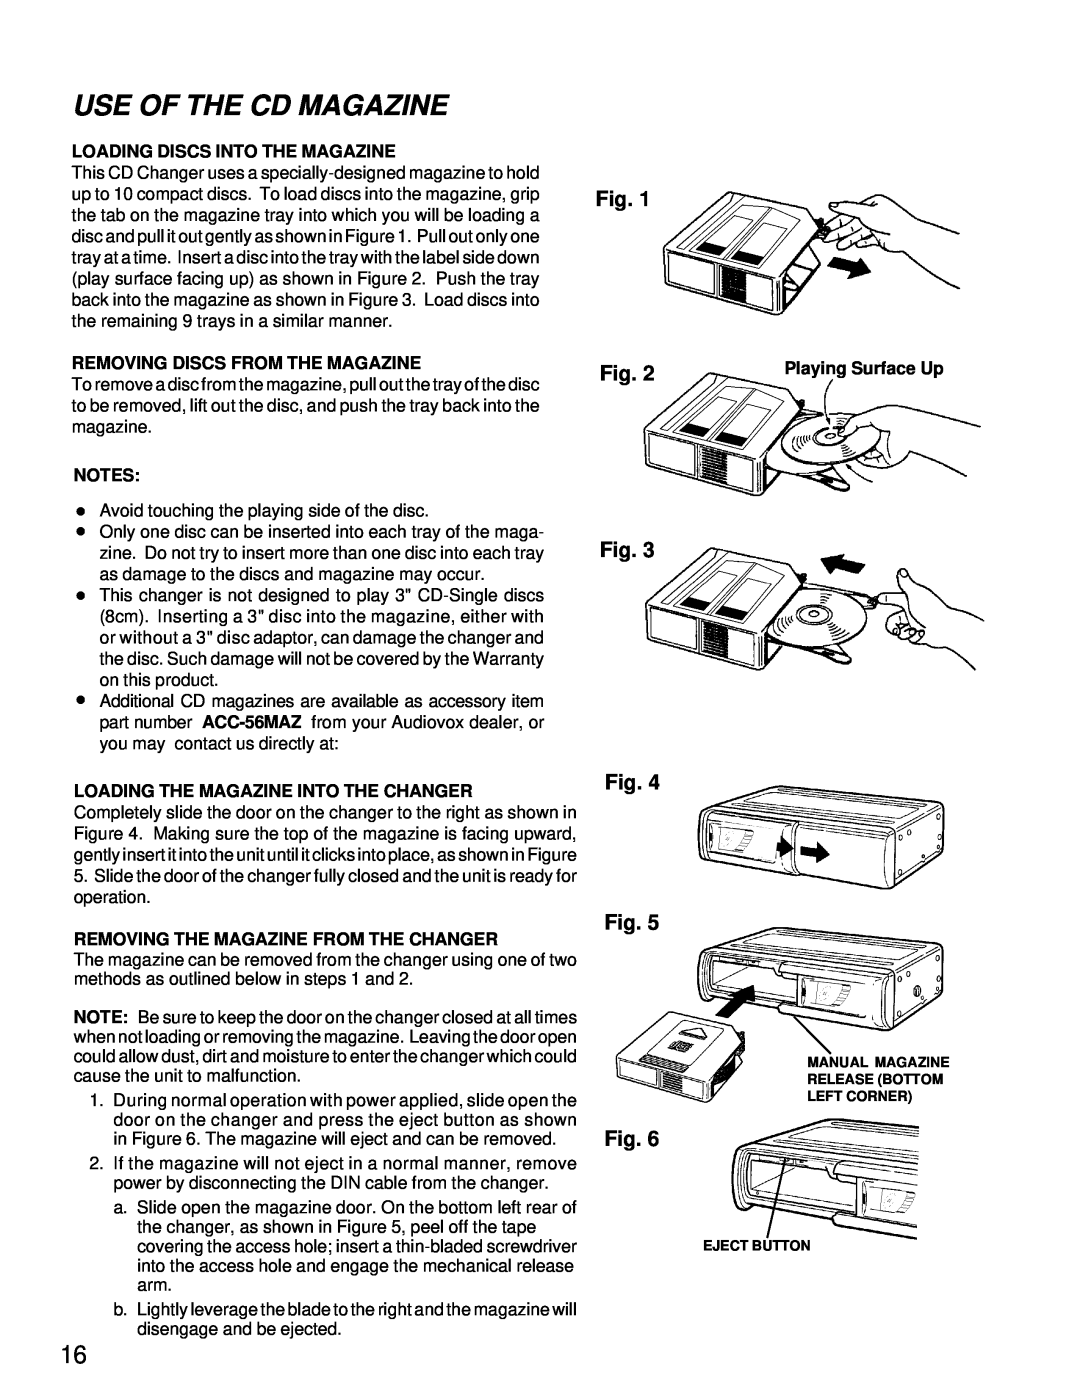 Audiovox ACC-56, ACC56 owner manual Use Of The Cd Magazine 